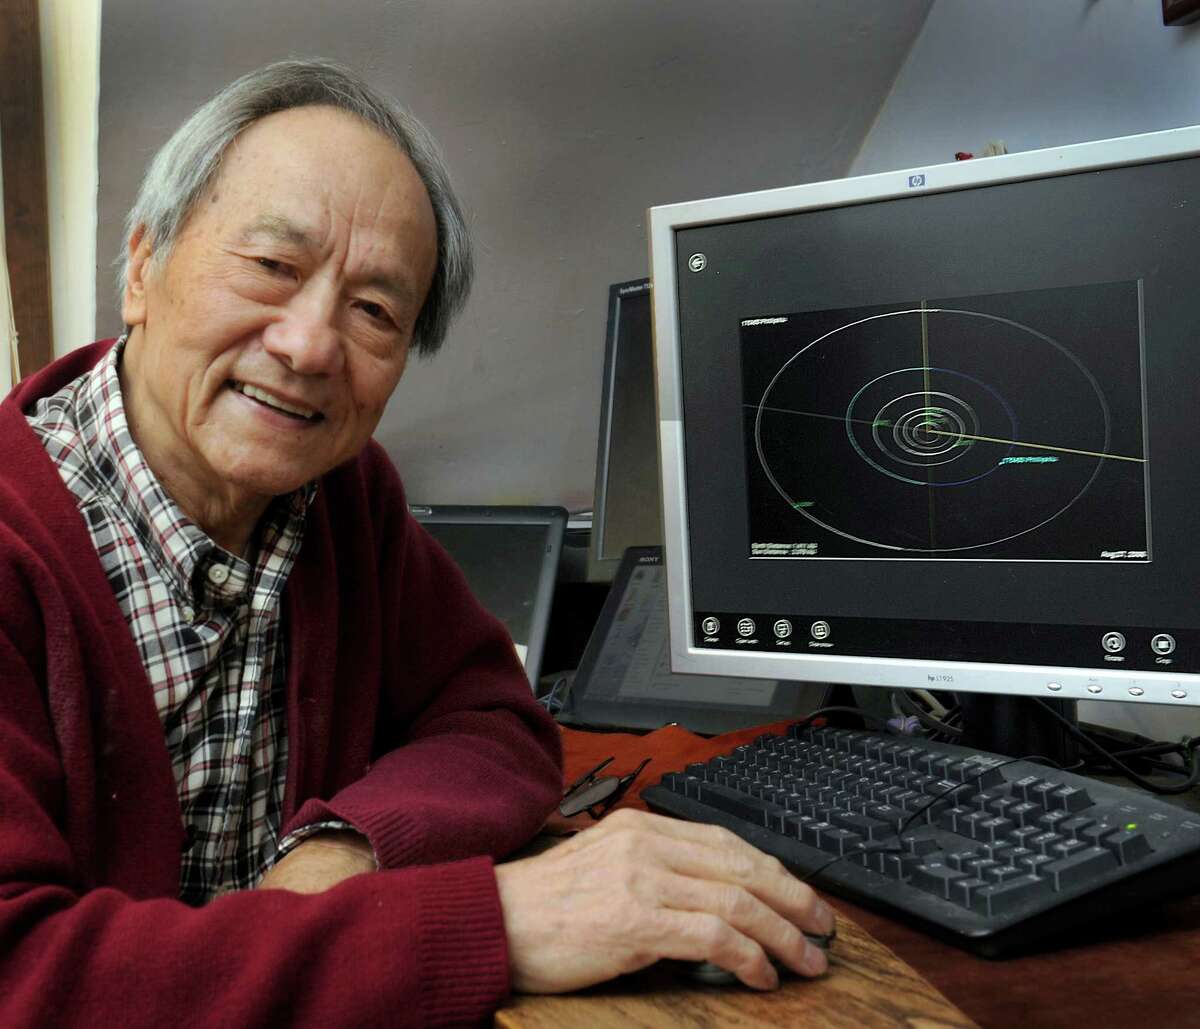 Dr. Phillip Lu, a retired professor of astronomy at Western Connecticut State University, recently had a minor planet named after him - 175450 Phillipklu. Lu is photographed in his Danbury home next to a computer image that shows the planet, Thursday, Nov. 6, 2014.